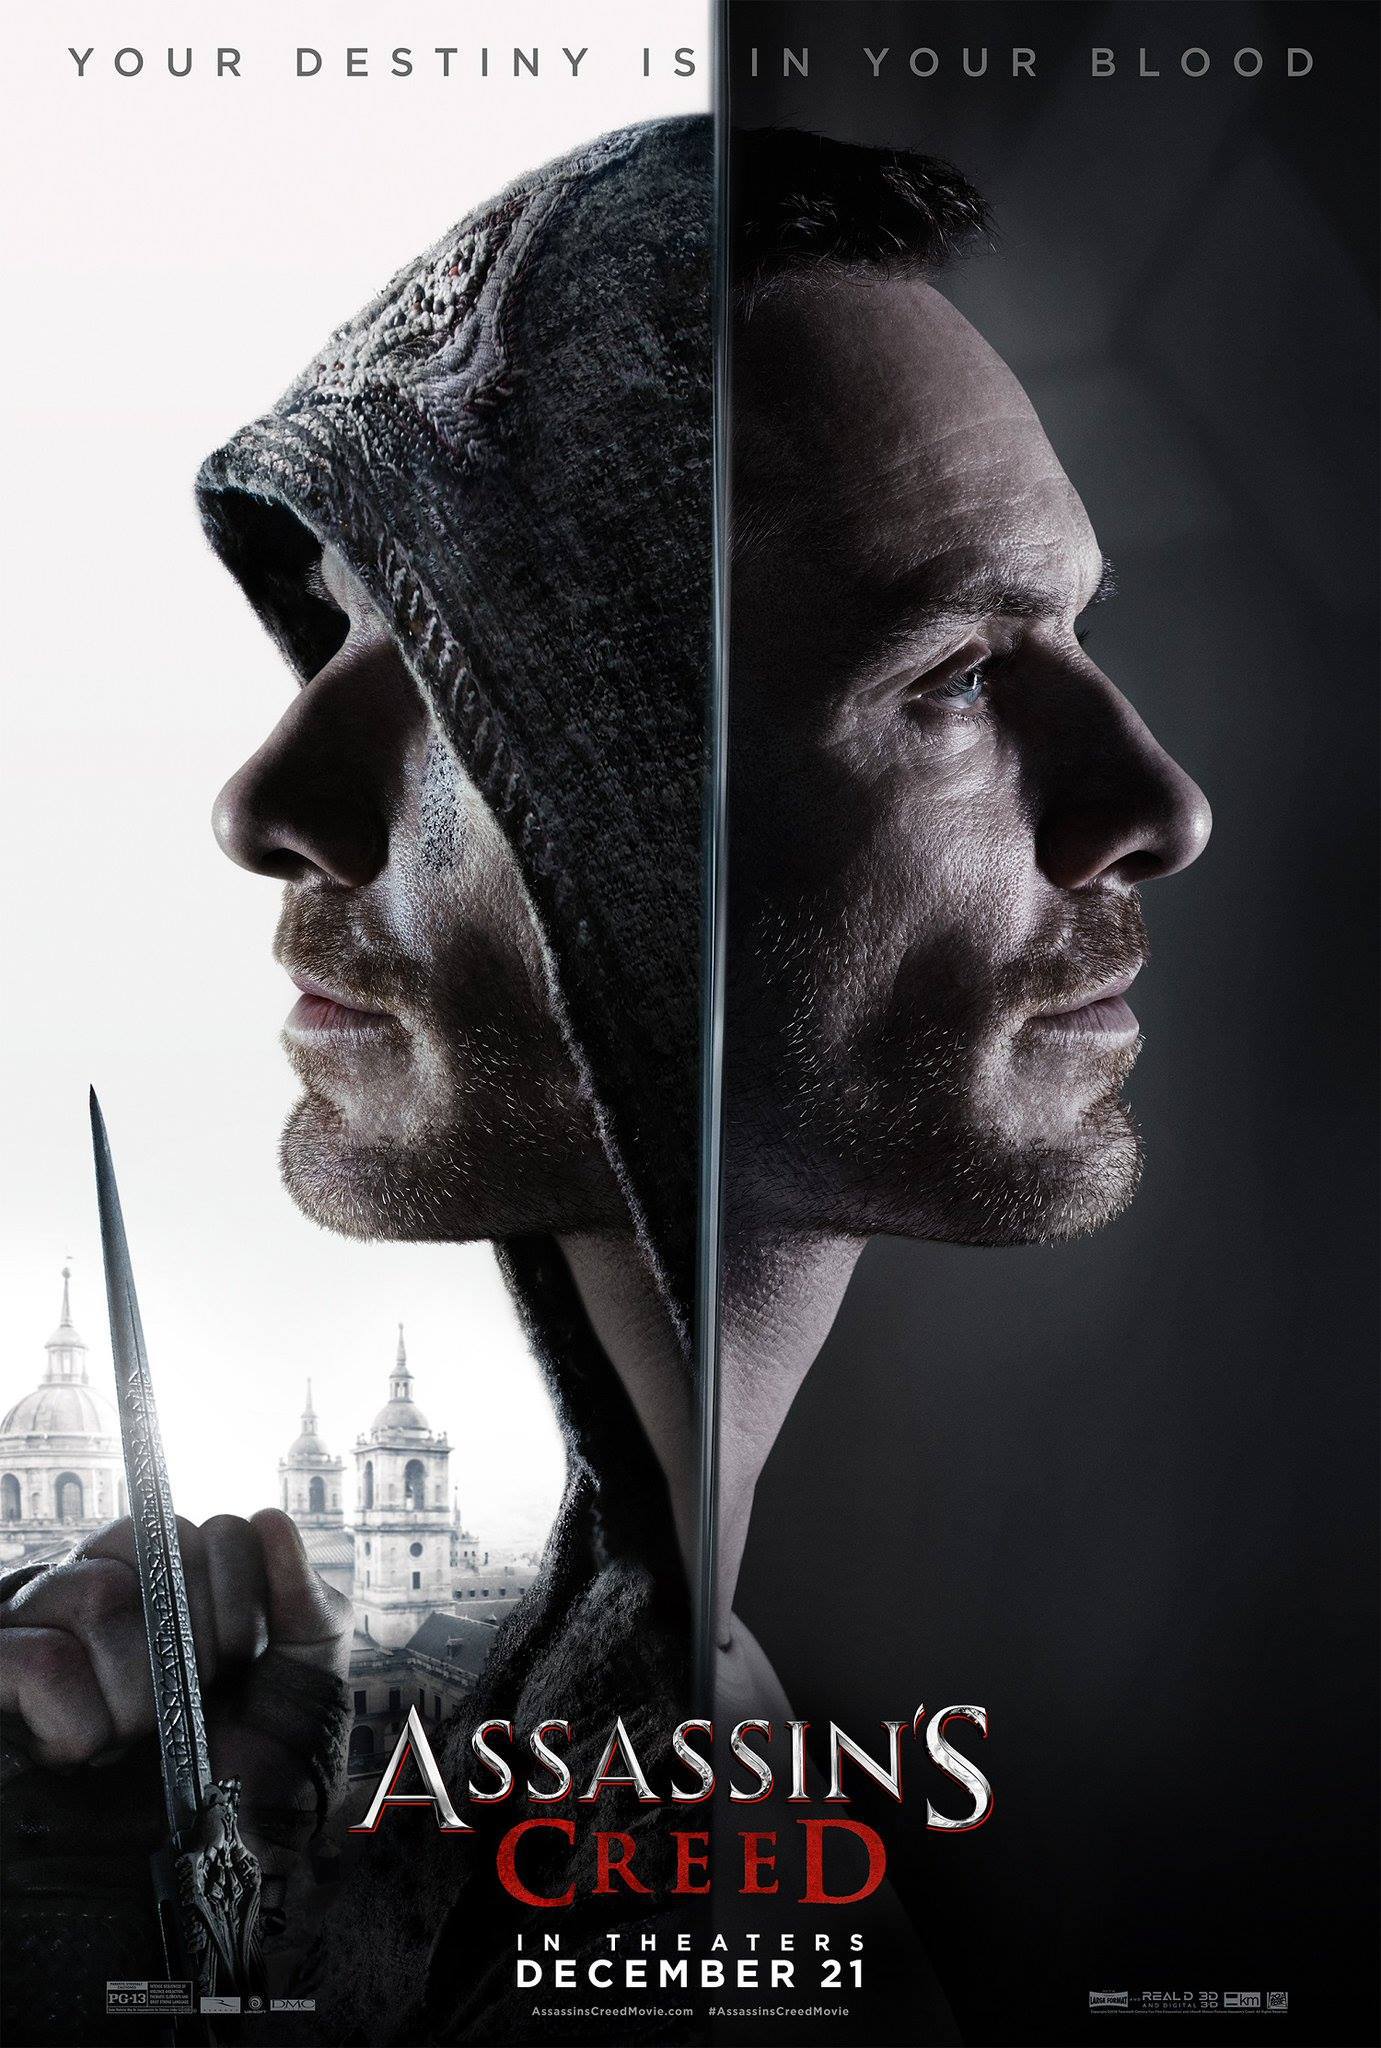 Assassin’s Creed Movie Poster